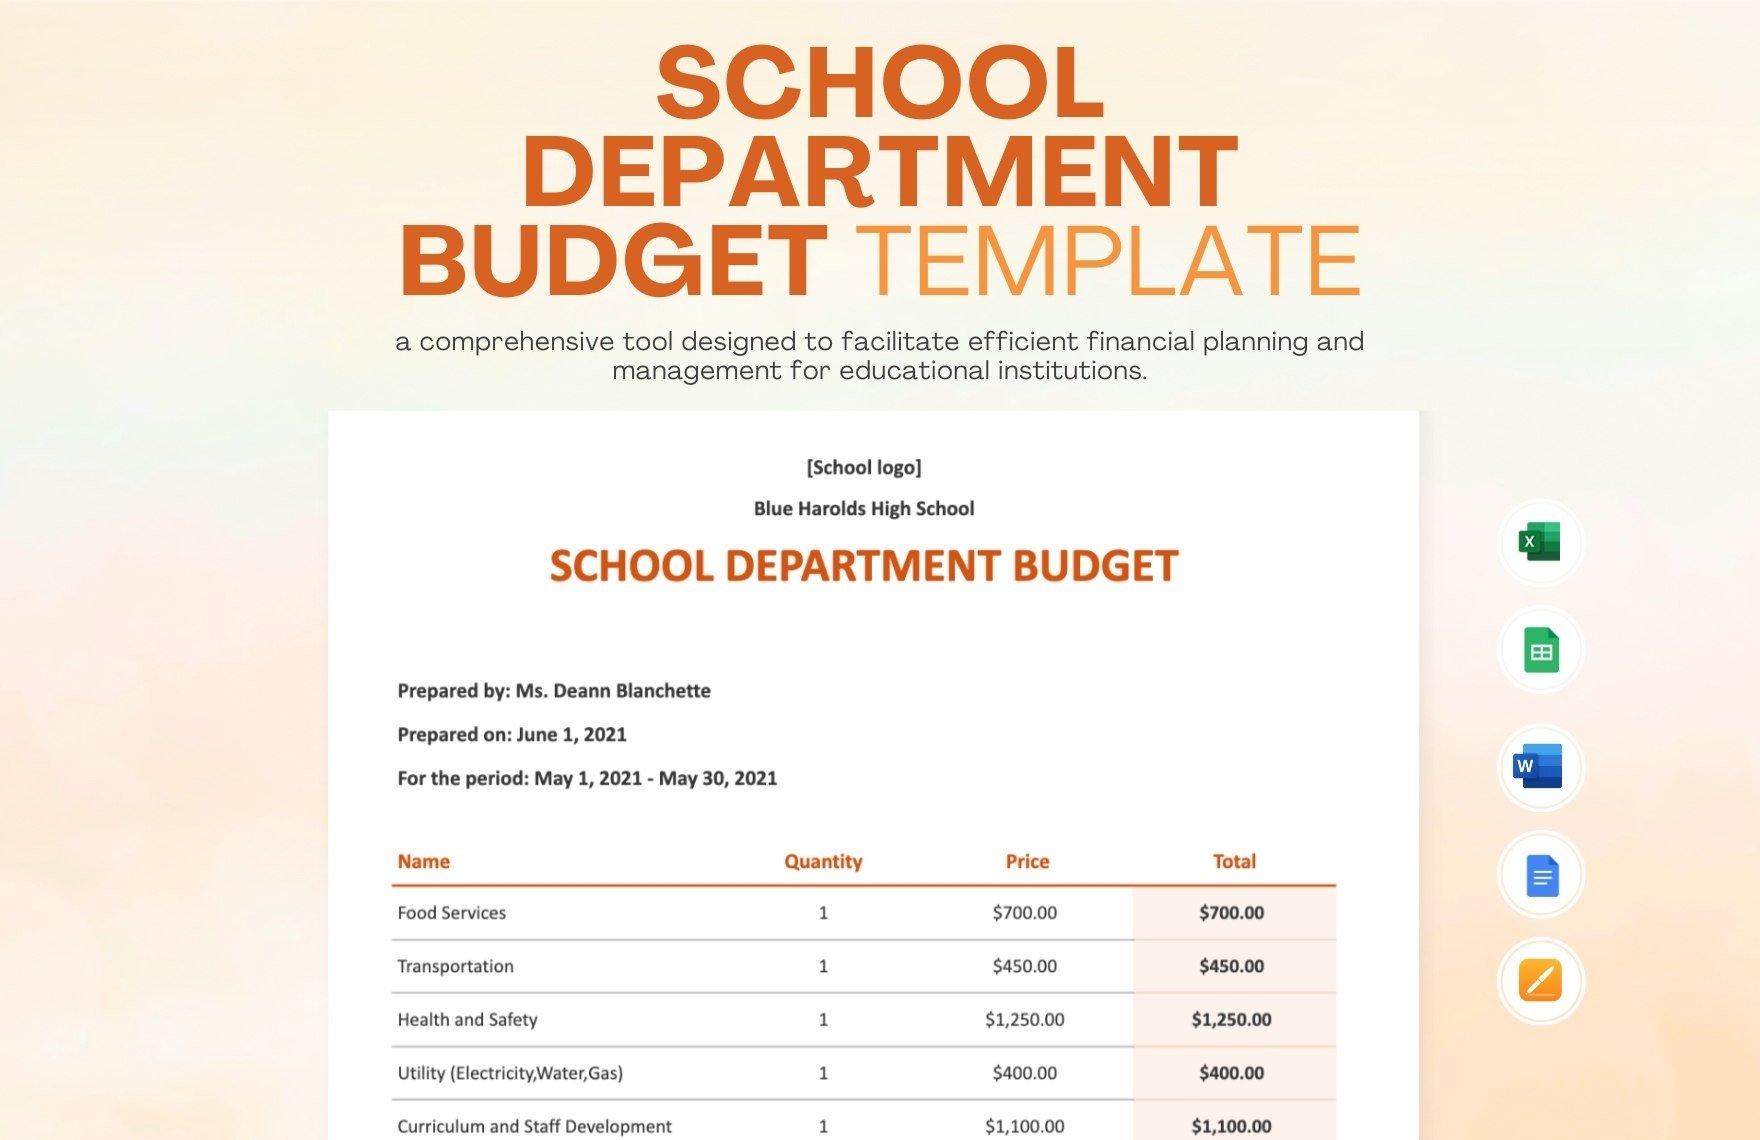 School Department Budget Template in Word, Google Docs, Excel, Google Sheets, Apple Pages